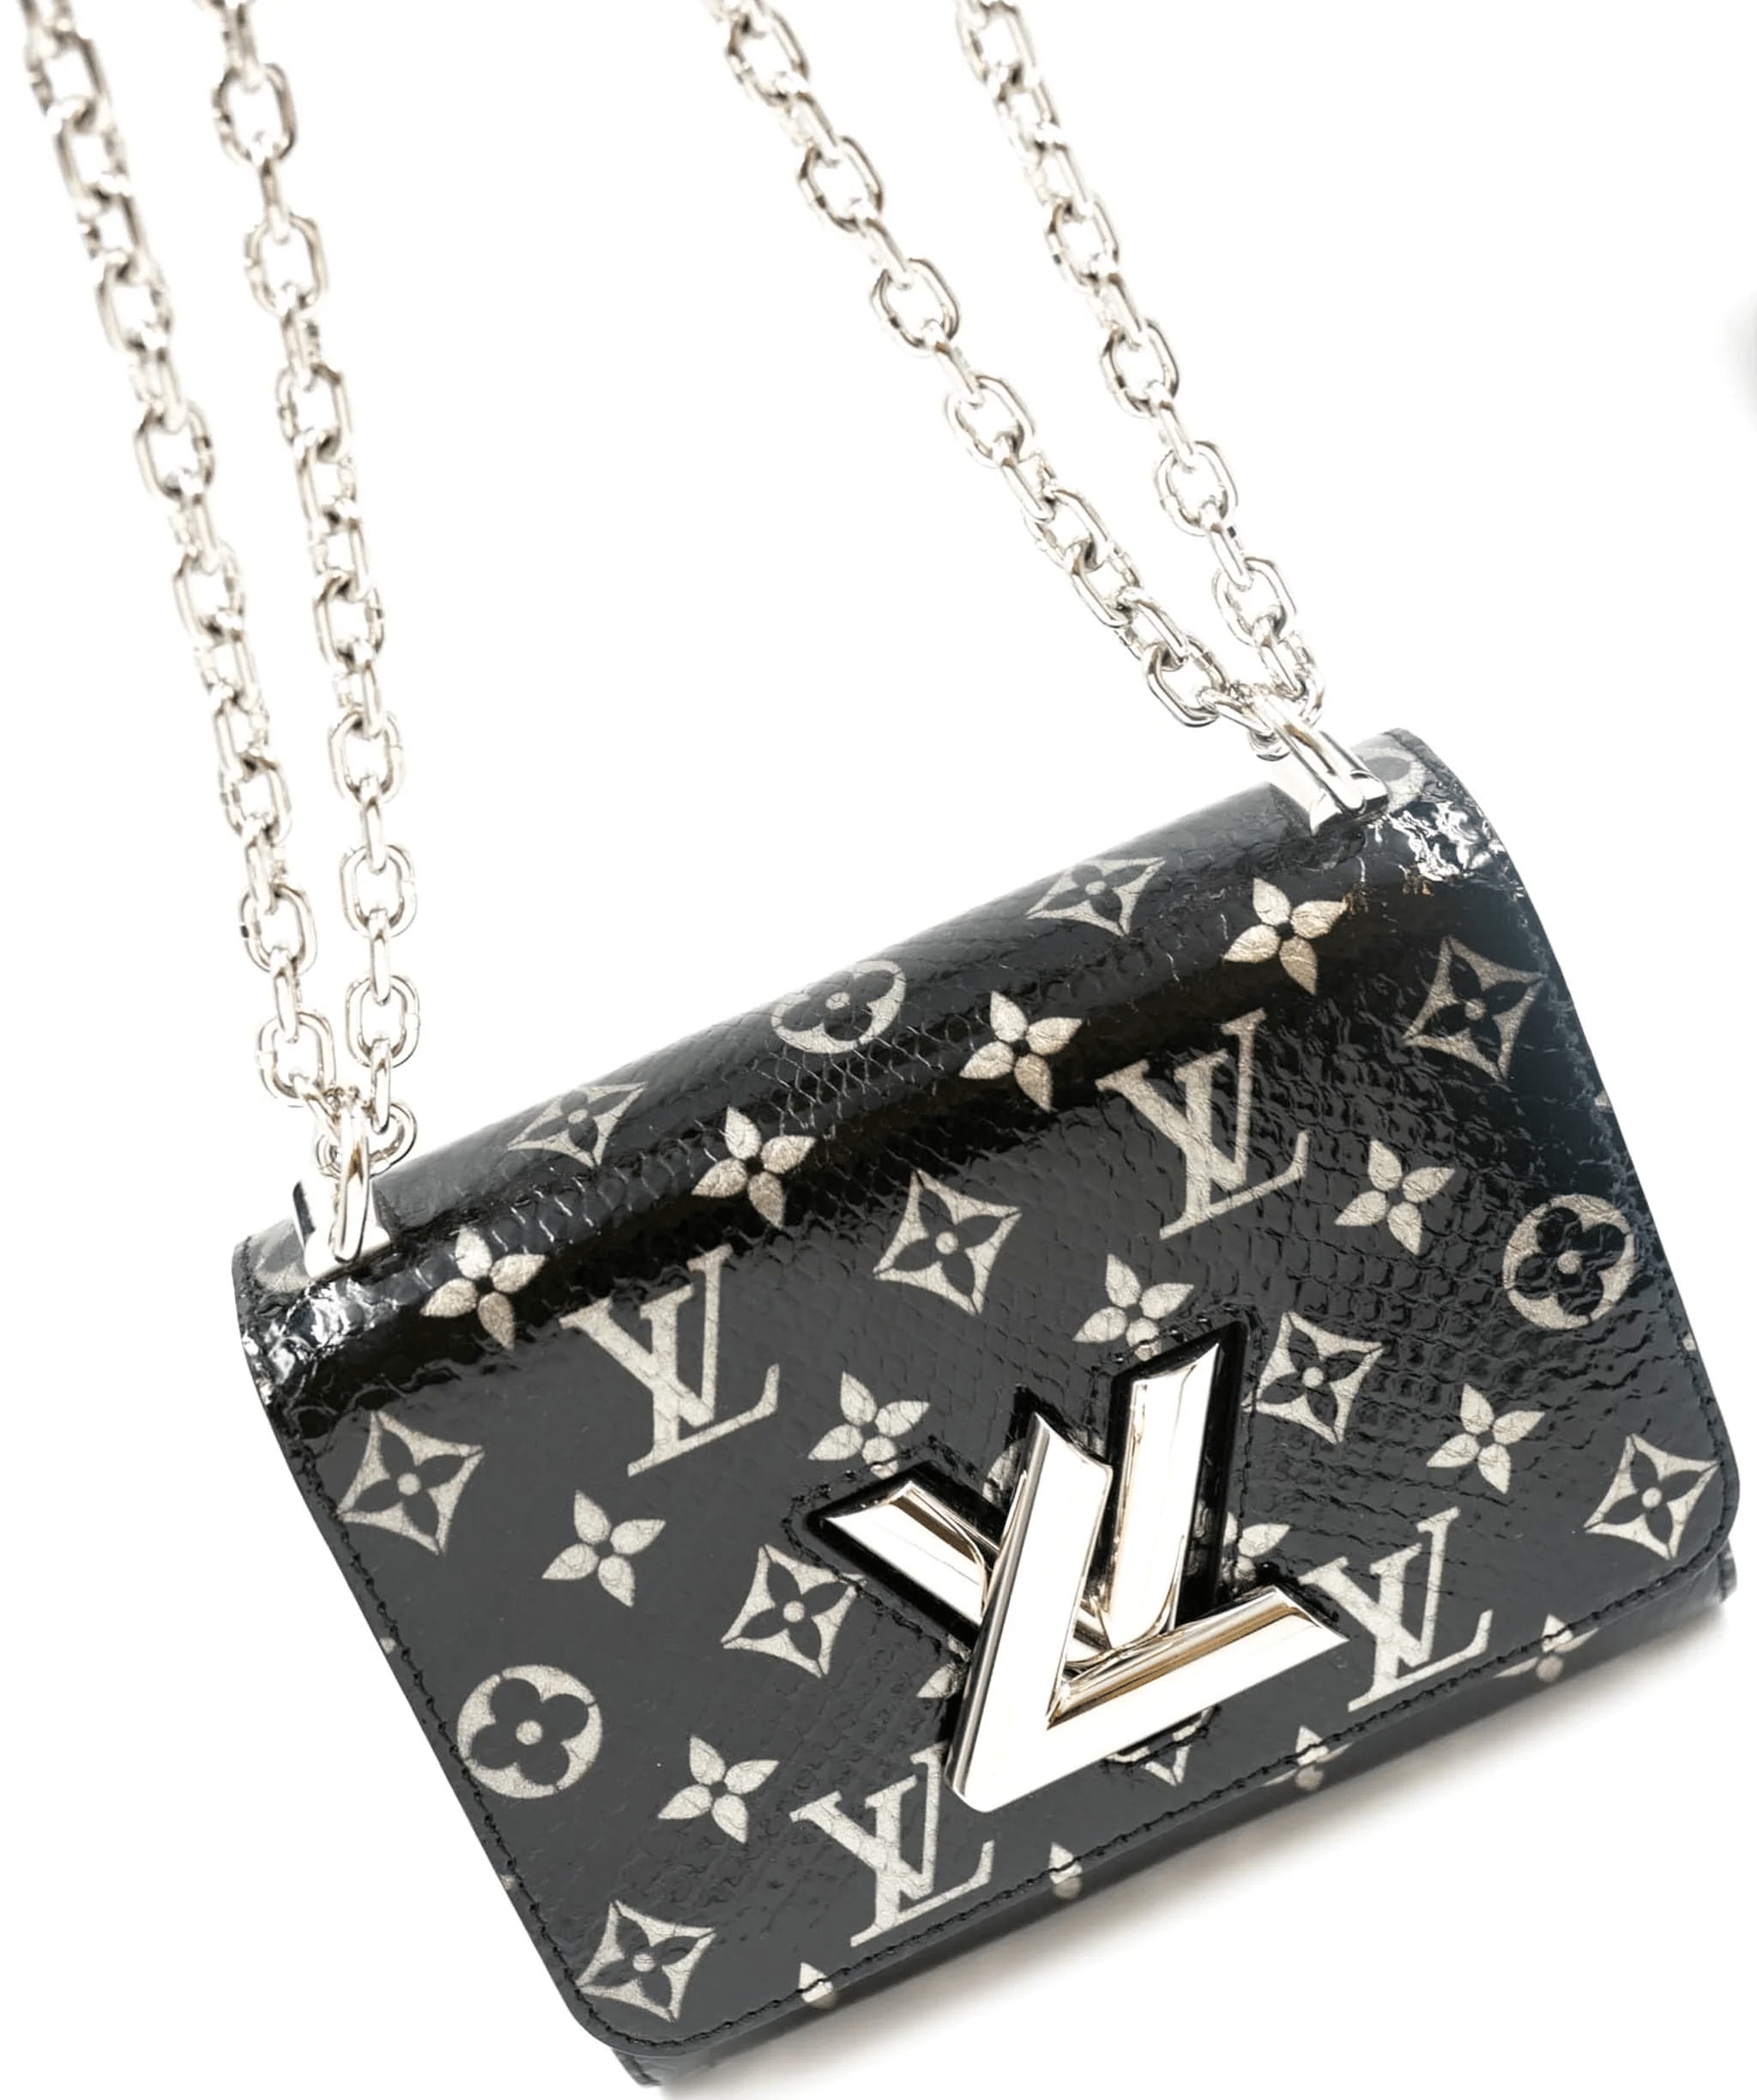 Louis Vuitton LV Twist bag Silver Hardware comes with Cities - AWC1683